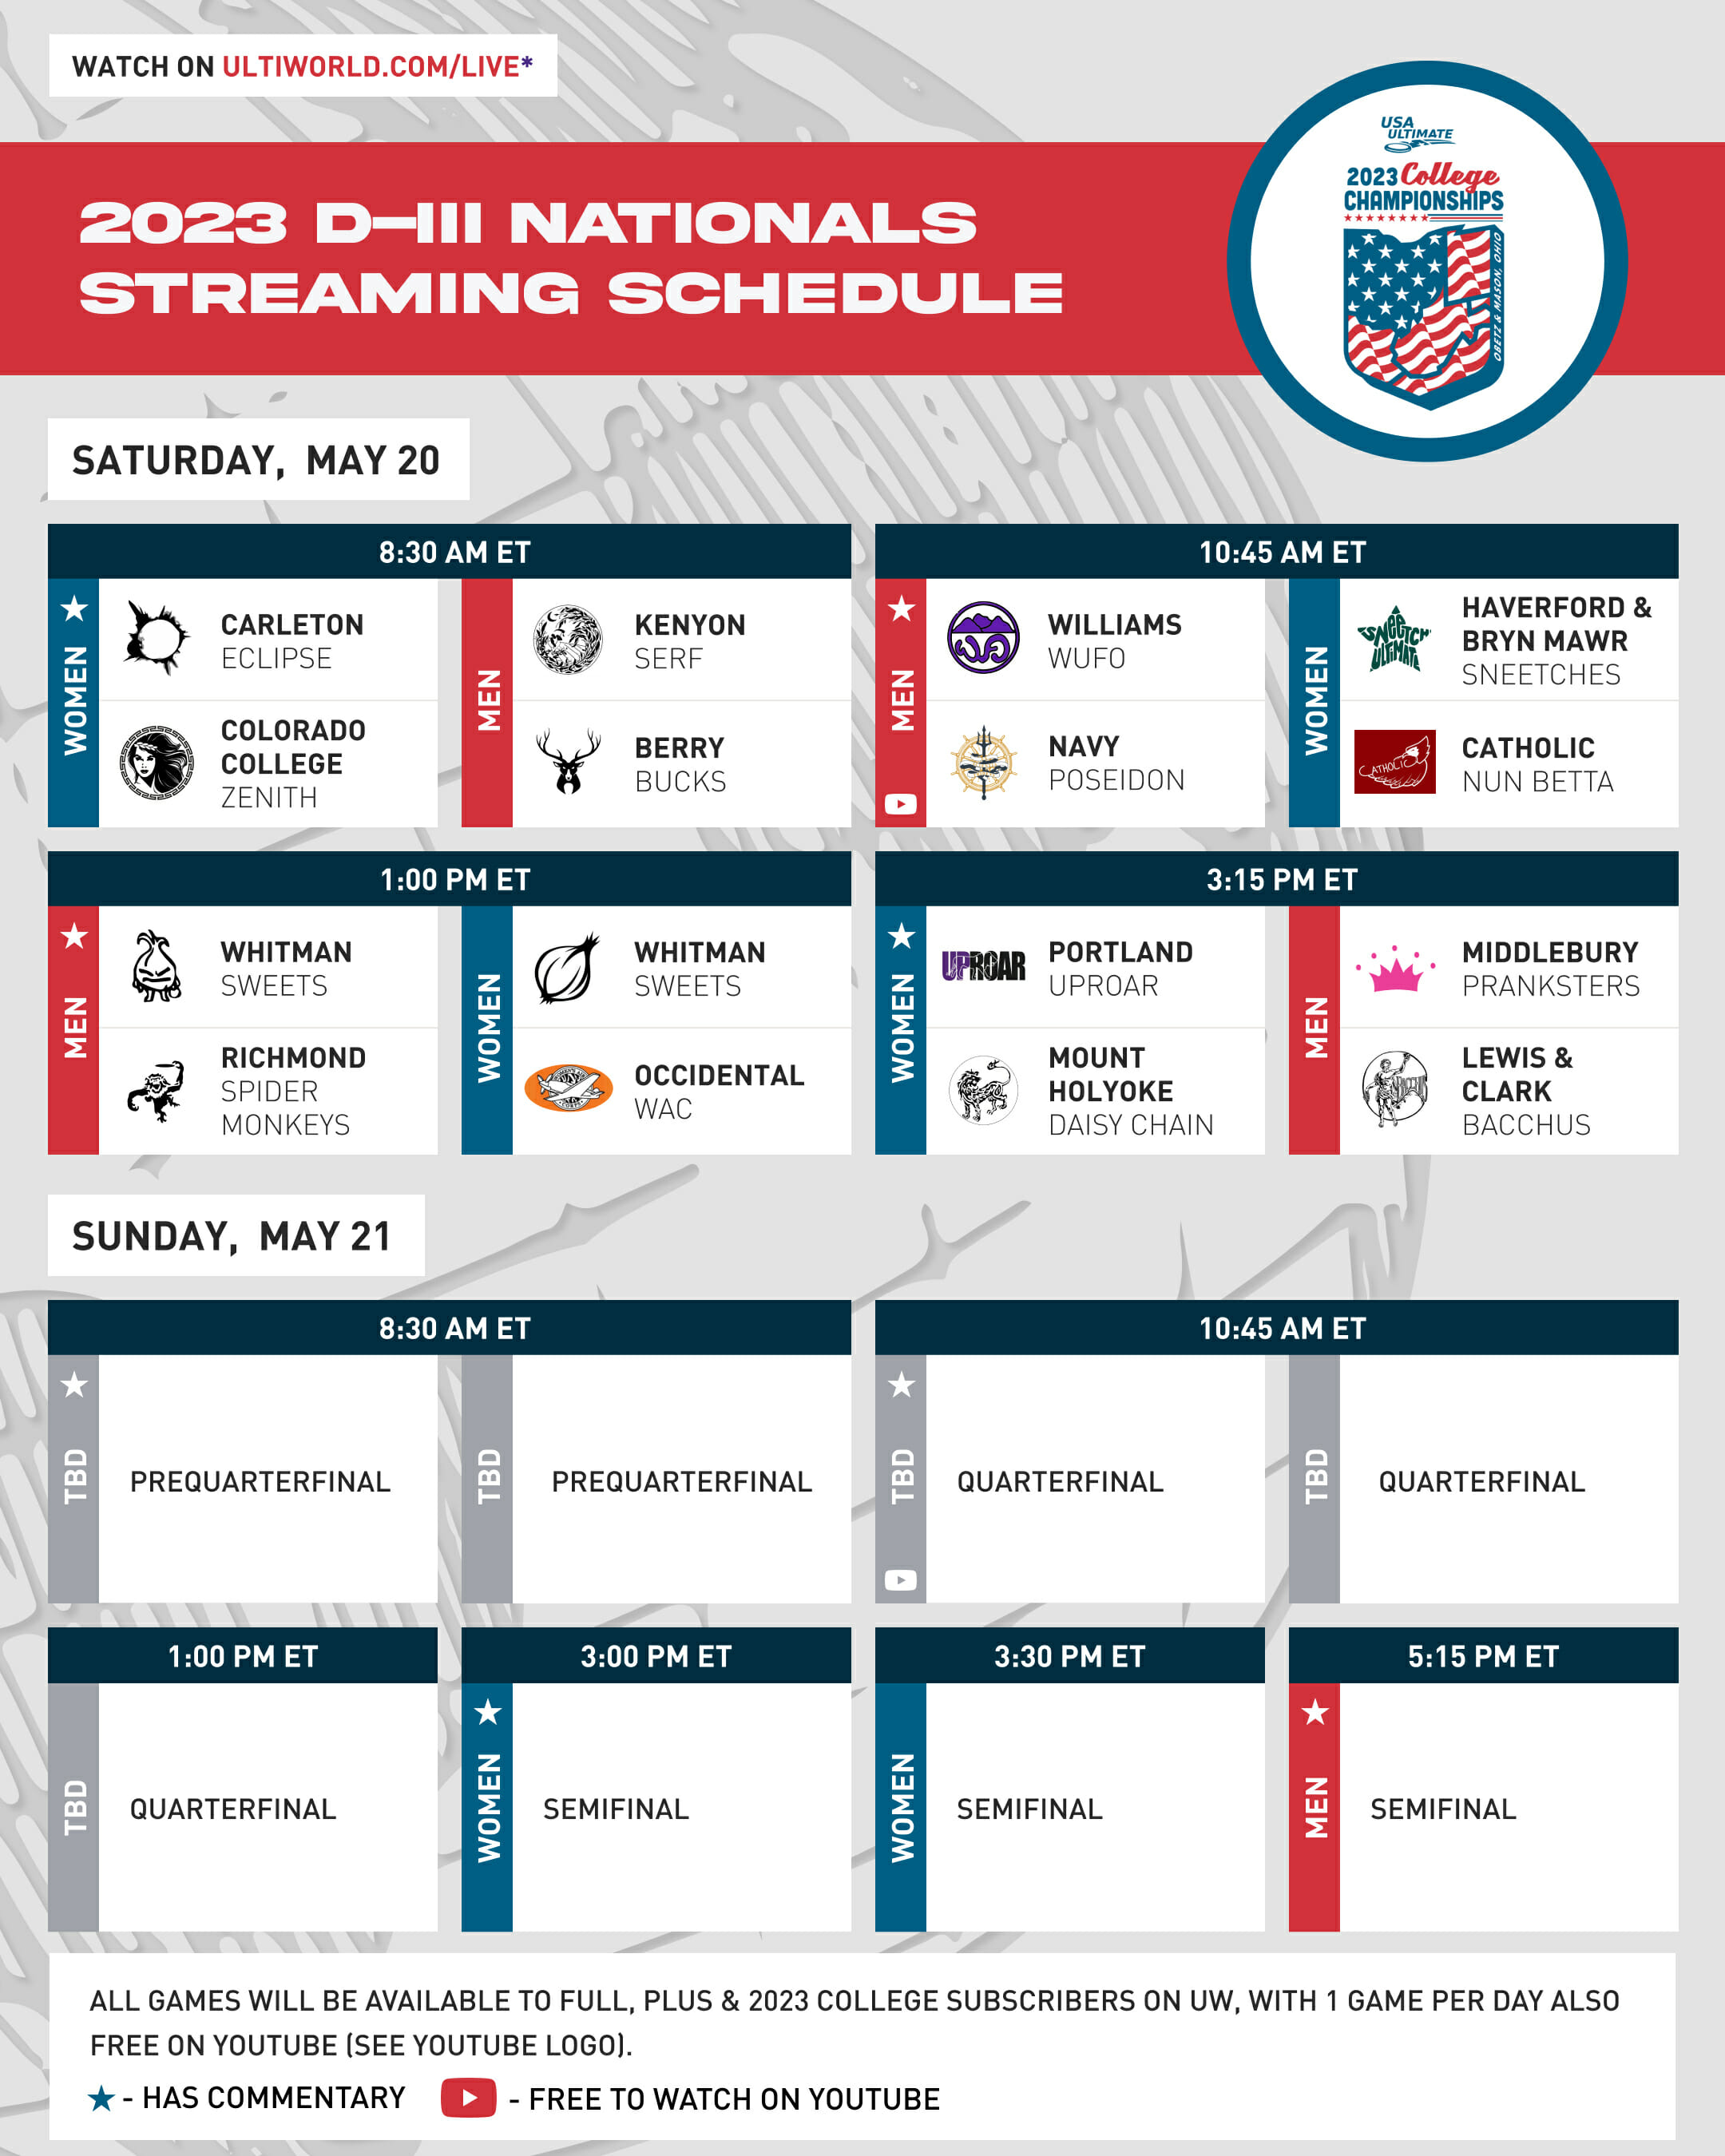 Live Broadcast and Streaming Schedule